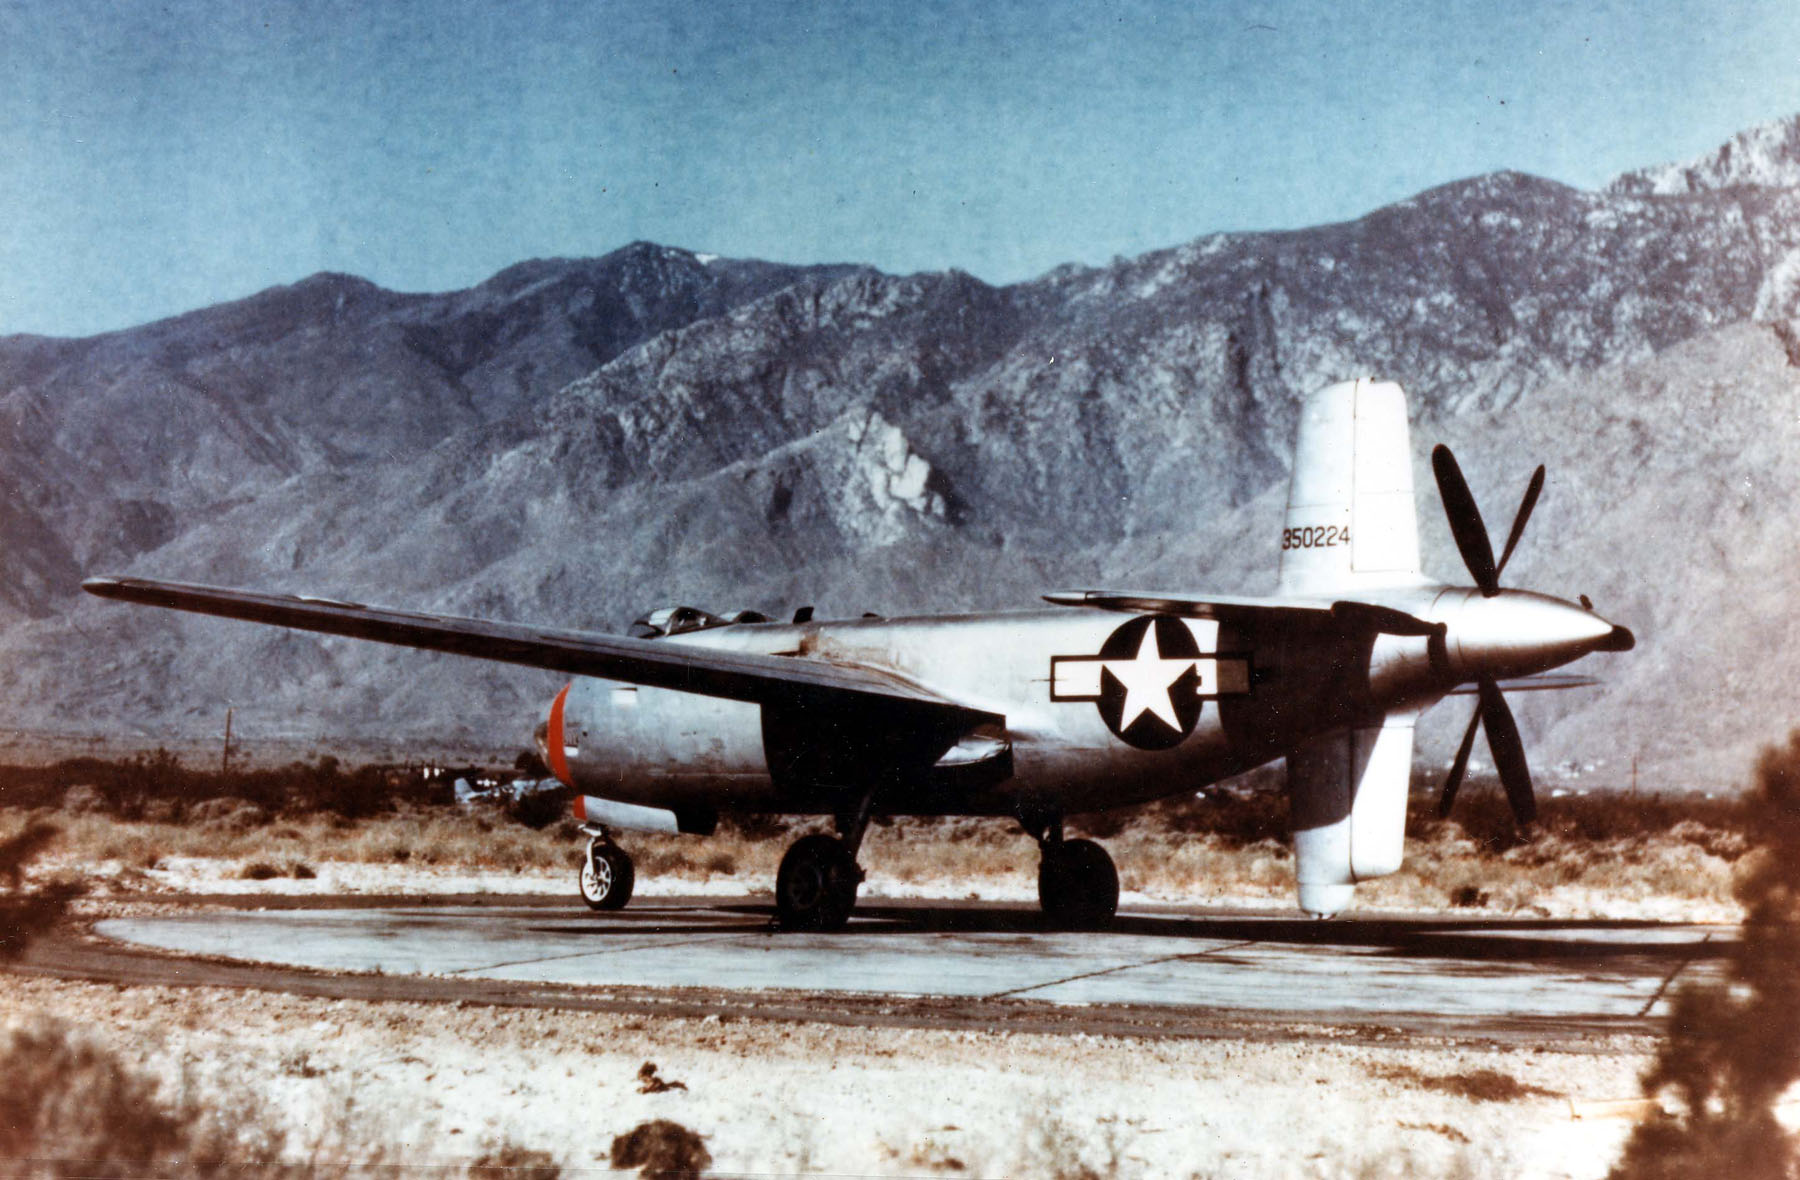 The first prototype XB-42, 43-50224, at Palm Springs, California, 1945. (U.S. Air Force)